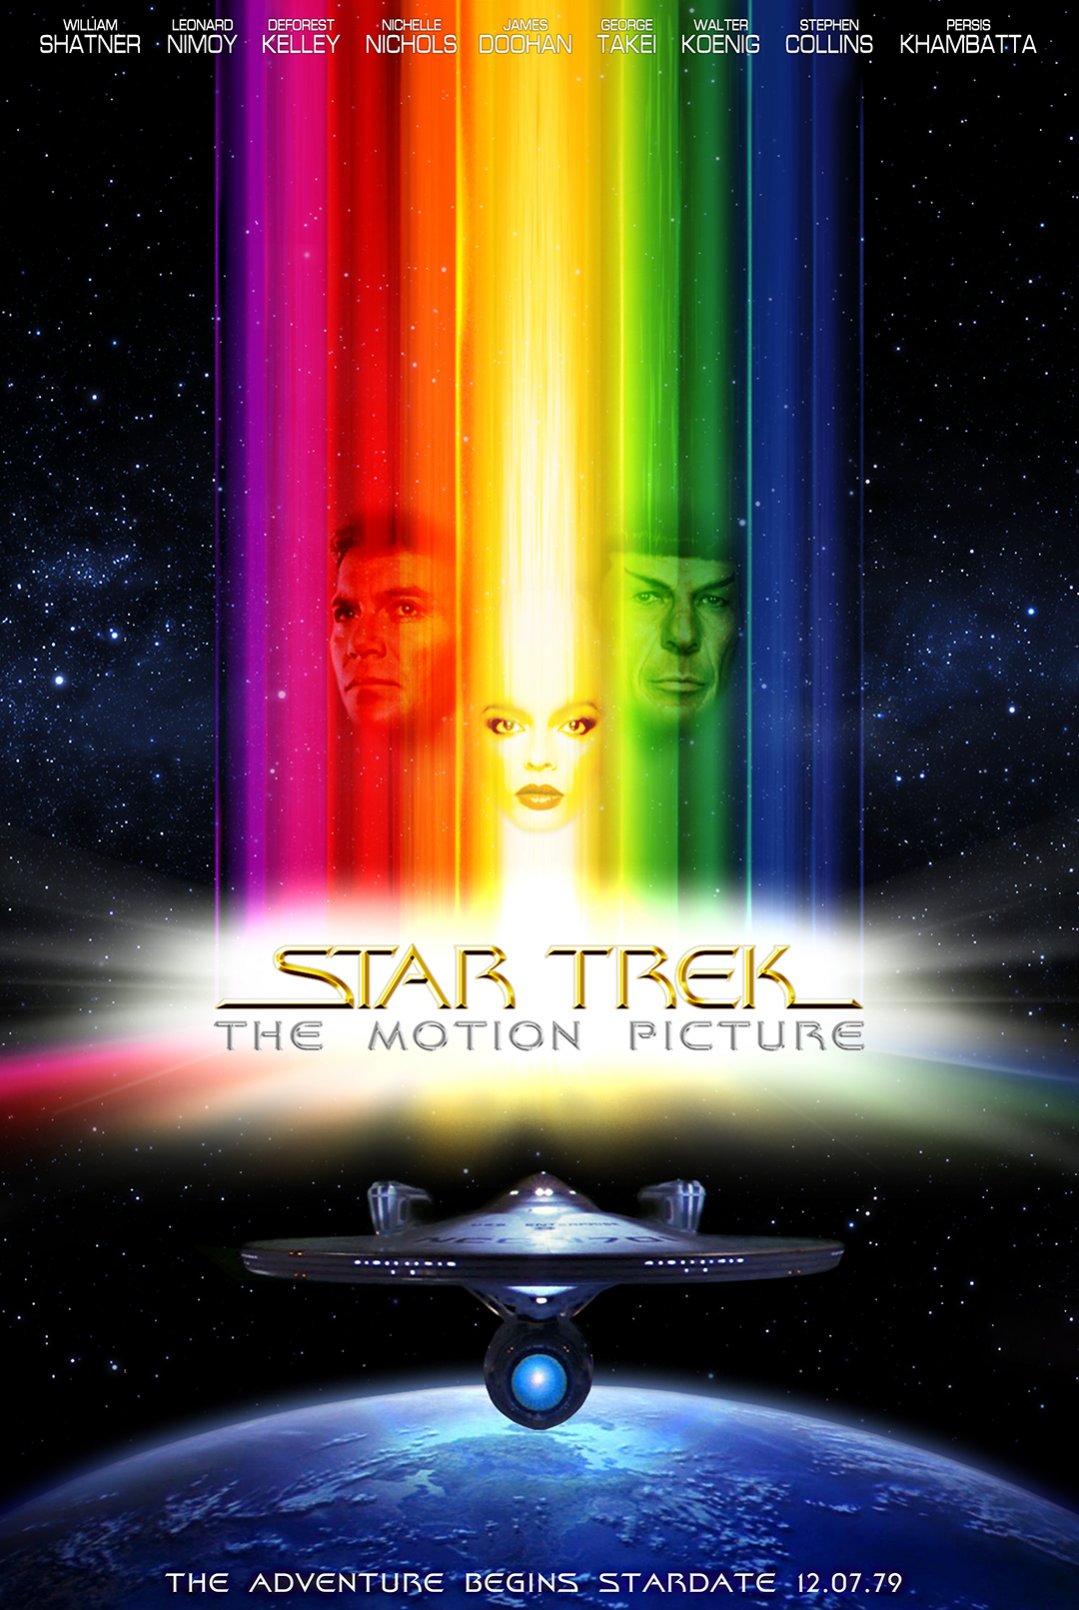 Amazing Star Trek: The Motion Picture Pictures & Backgrounds